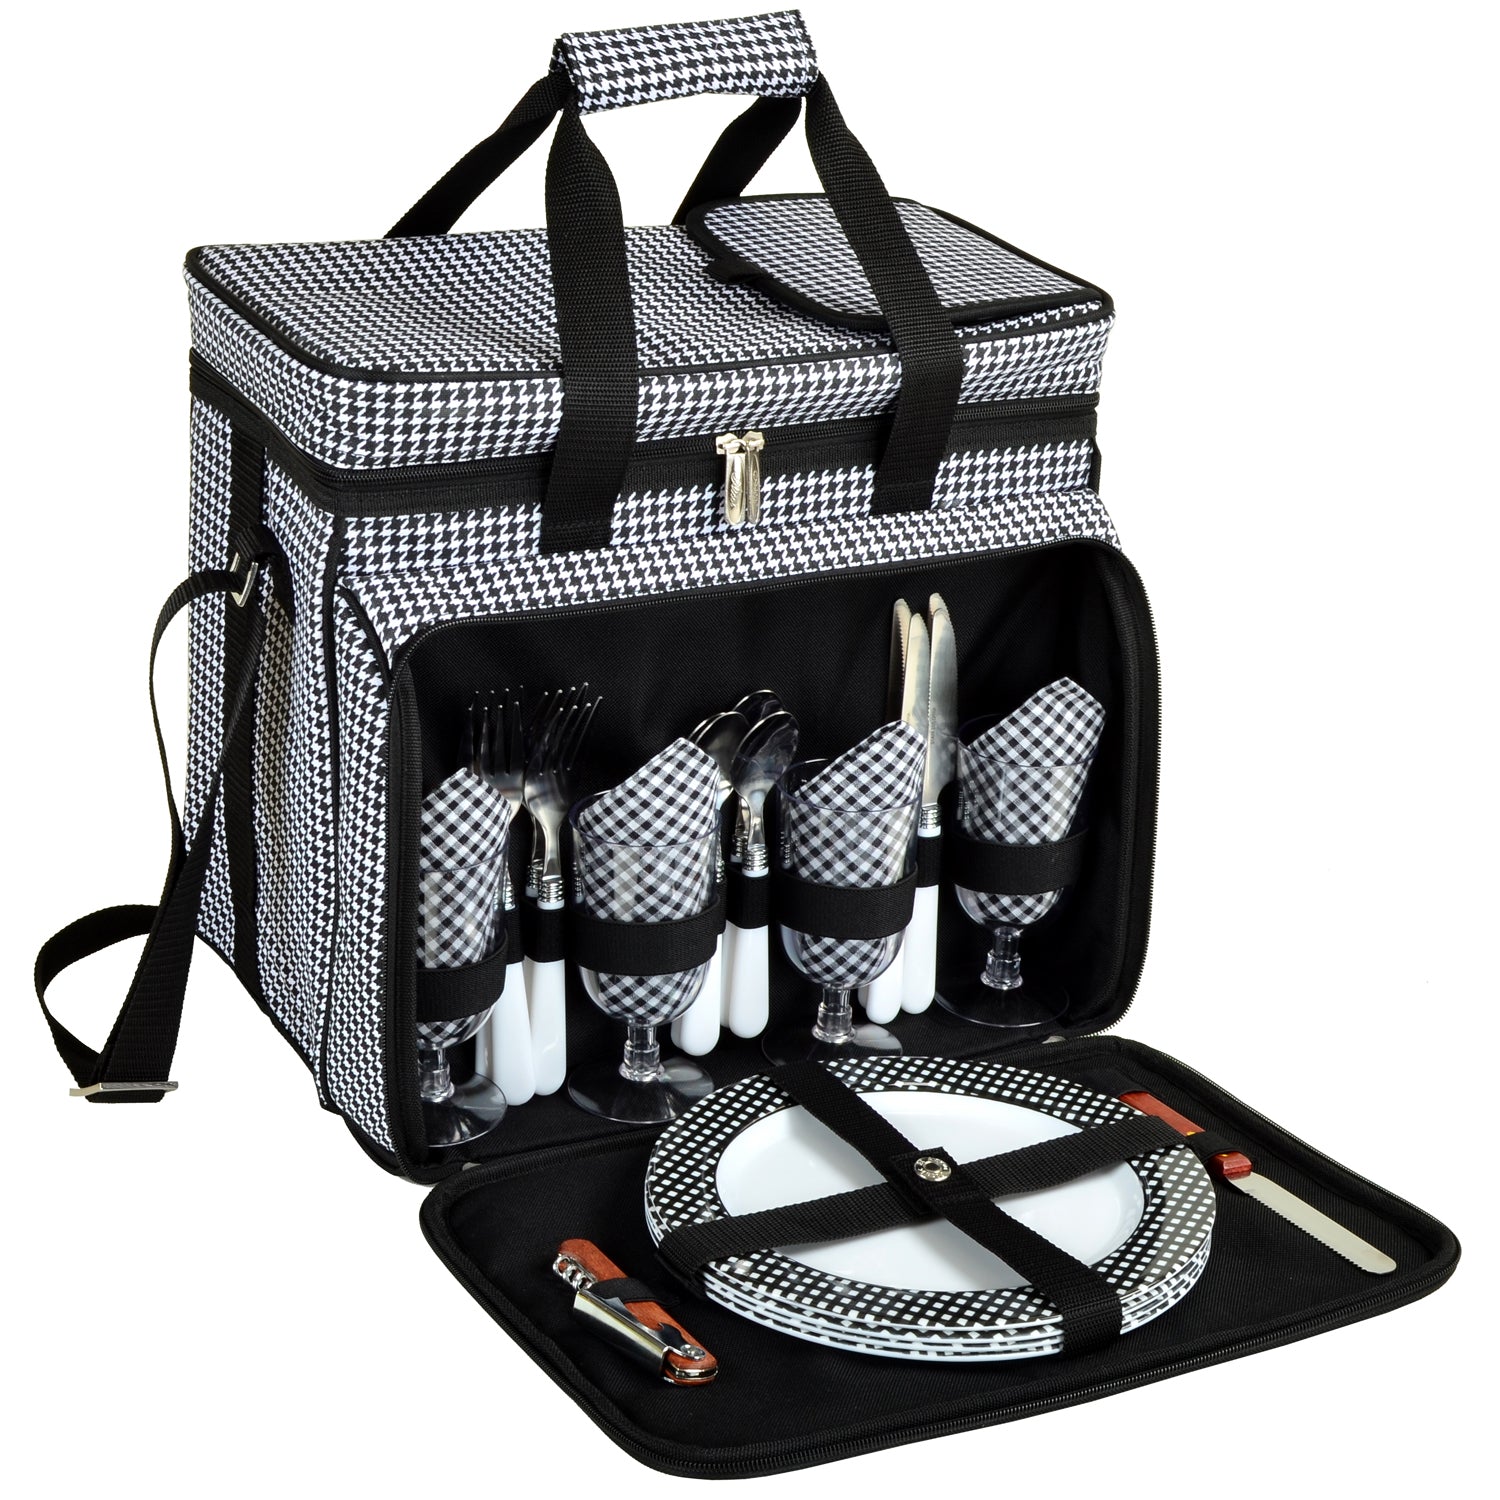 Picnic at Ascot Equipped Picnic Cooler with Service for 4 on